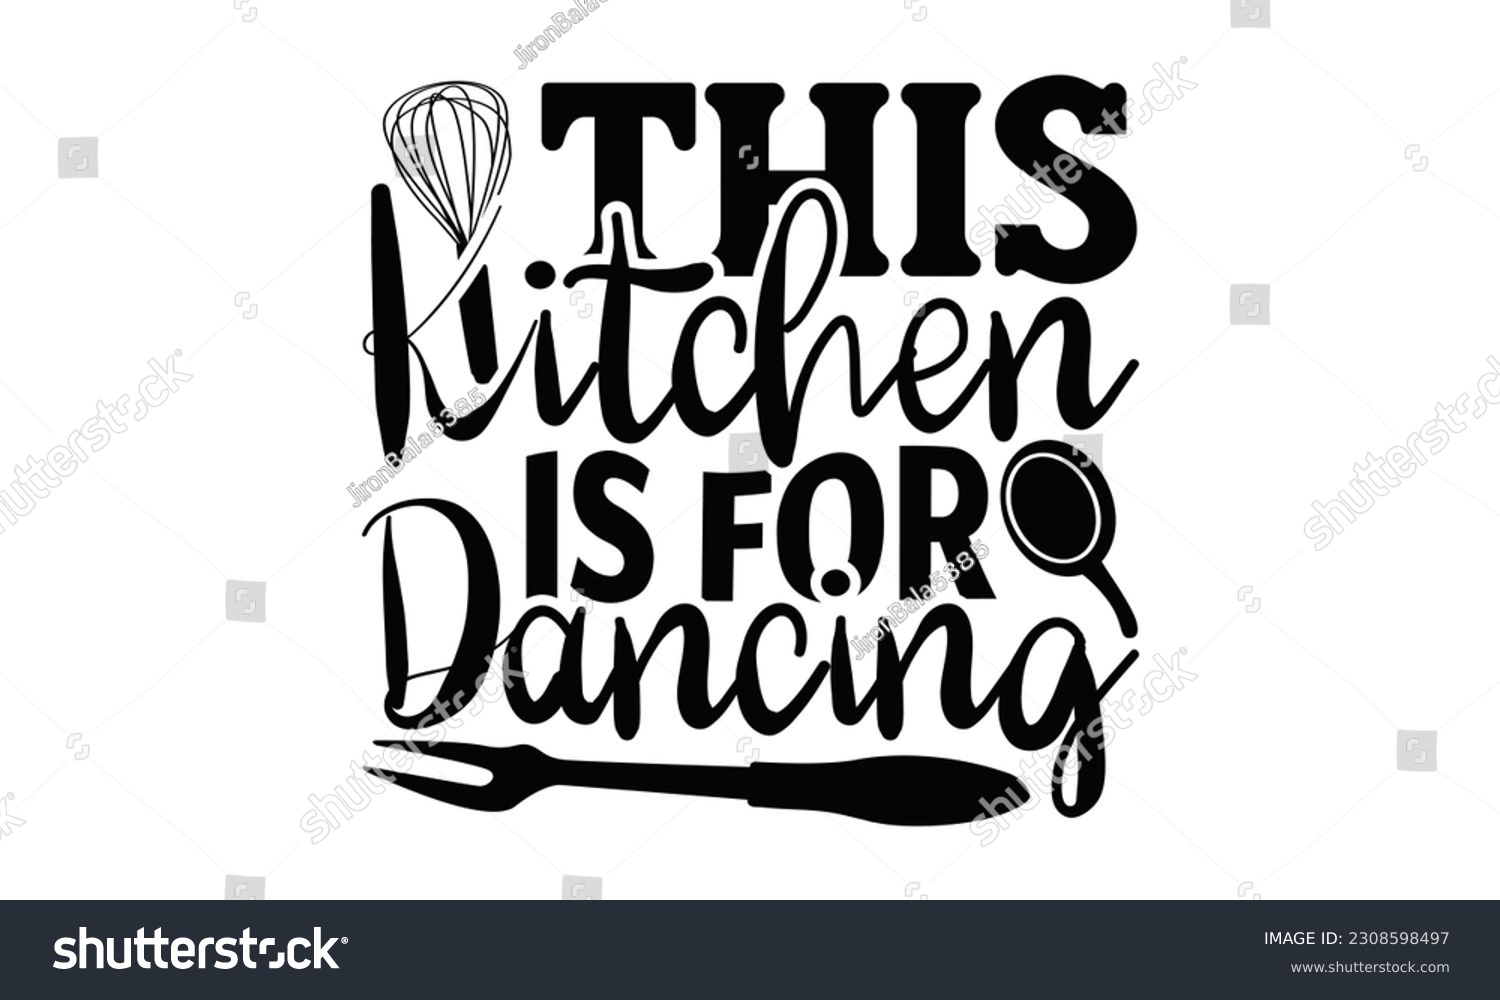 SVG of This Kitchen Is For Dancing - Cooking SVG Design, Hand drawn vintage illustration with hand-lettering and decoration elements with, SVG Files for Cutting.
 svg